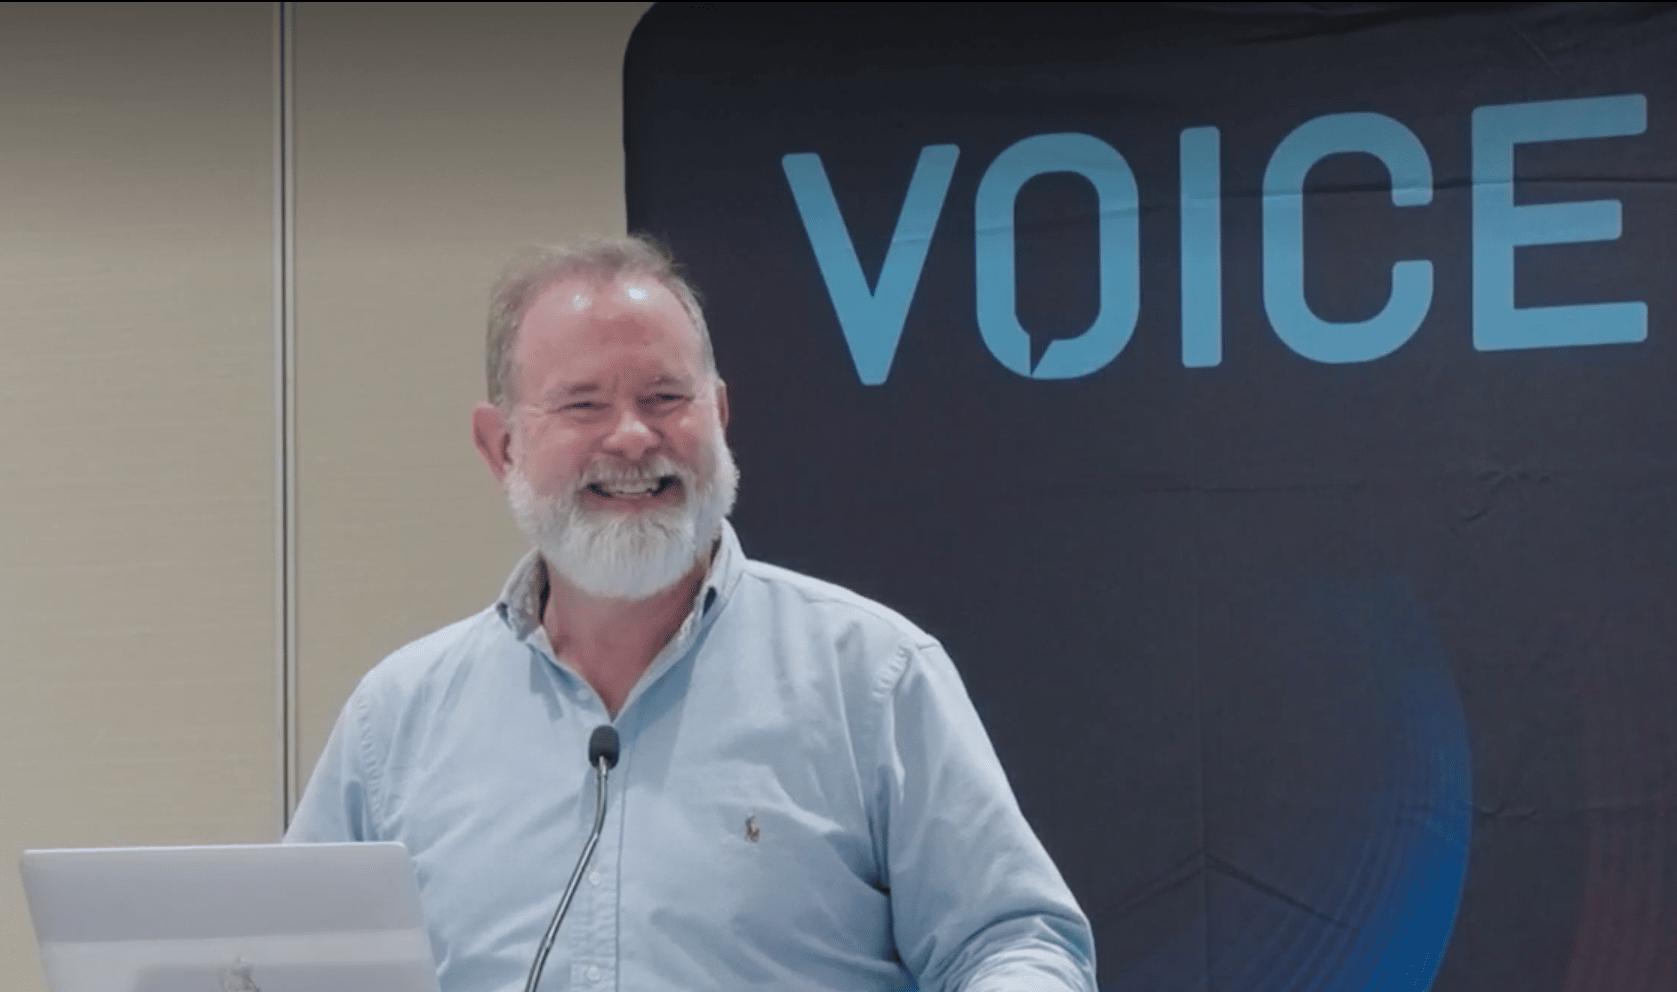 Verbit's Scott Ready speaking at a podium at the Voice22 conference